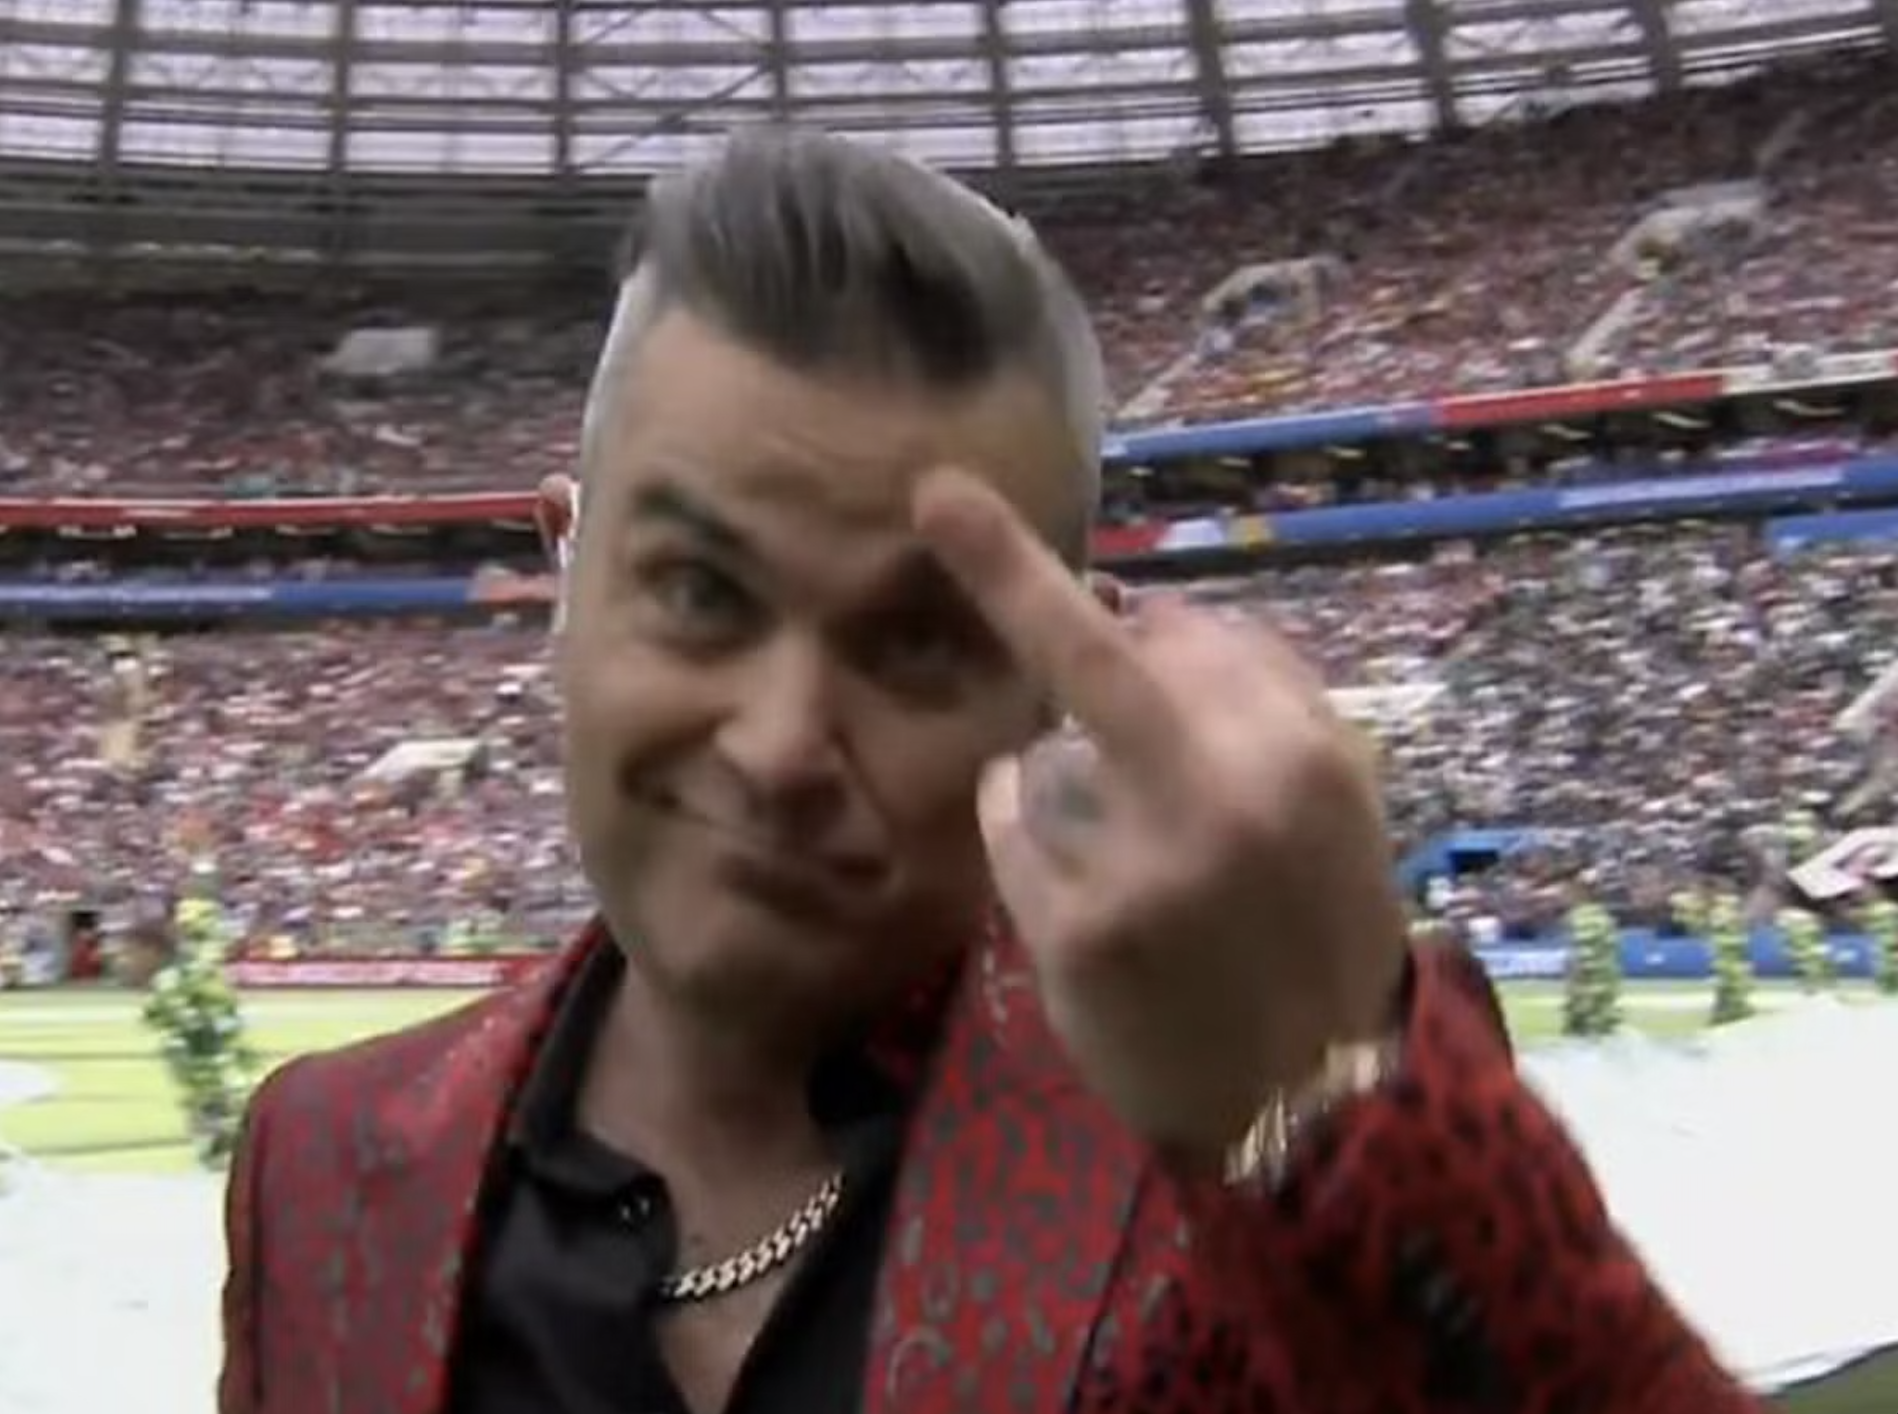 UFO sighting, middle finger for Russia and serious illnesses: what Robbie Williams, who celebrates his 50th birthday today, surprised the world with